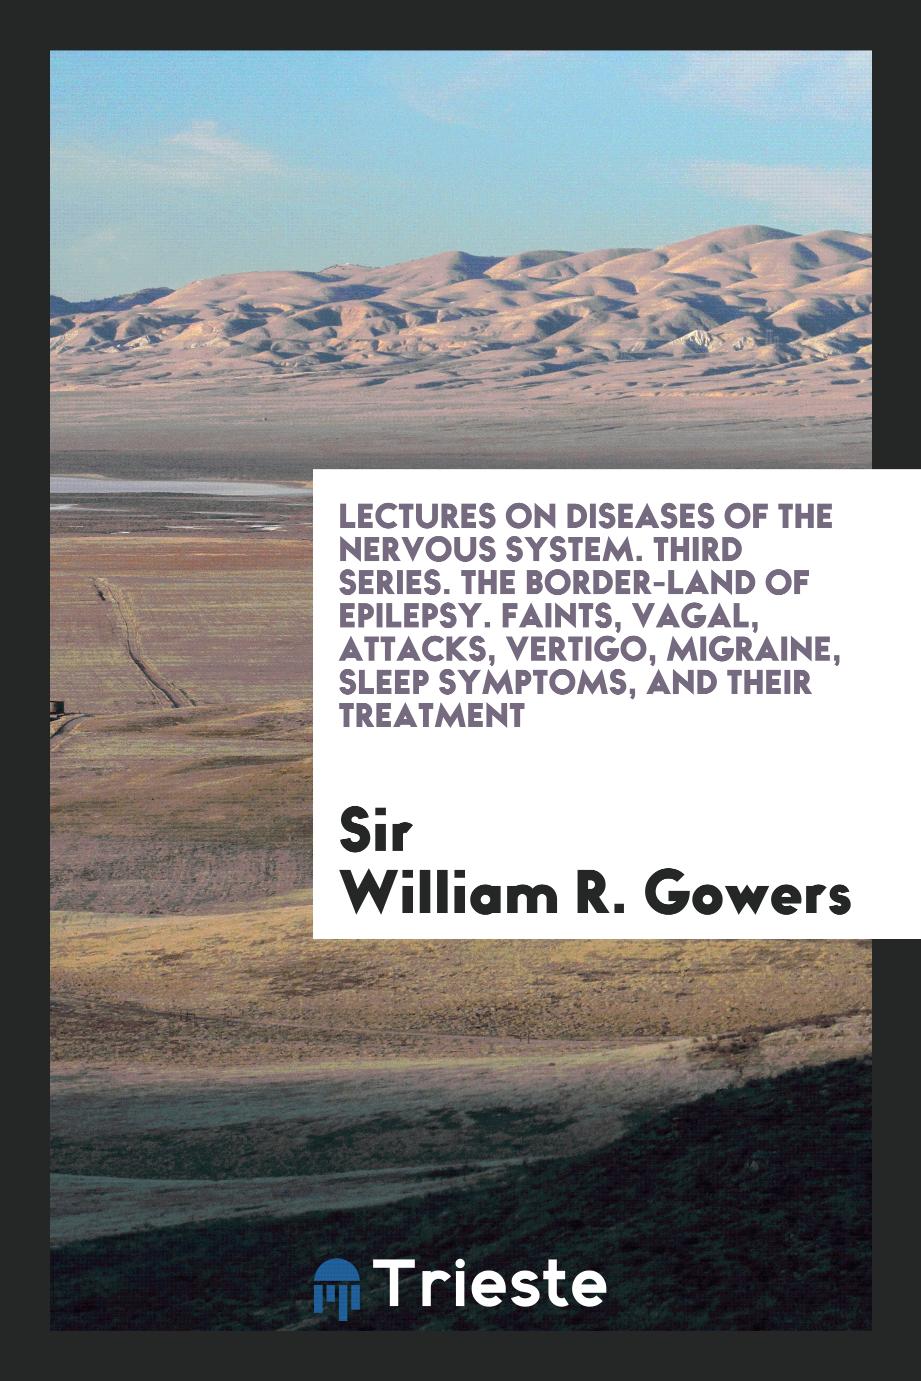 Lectures on Diseases of the Nervous System. Third Series. The Border-Land of Epilepsy. Faints, Vagal, Attacks, Vertigo, Migraine, Sleep Symptoms, and Their Treatment